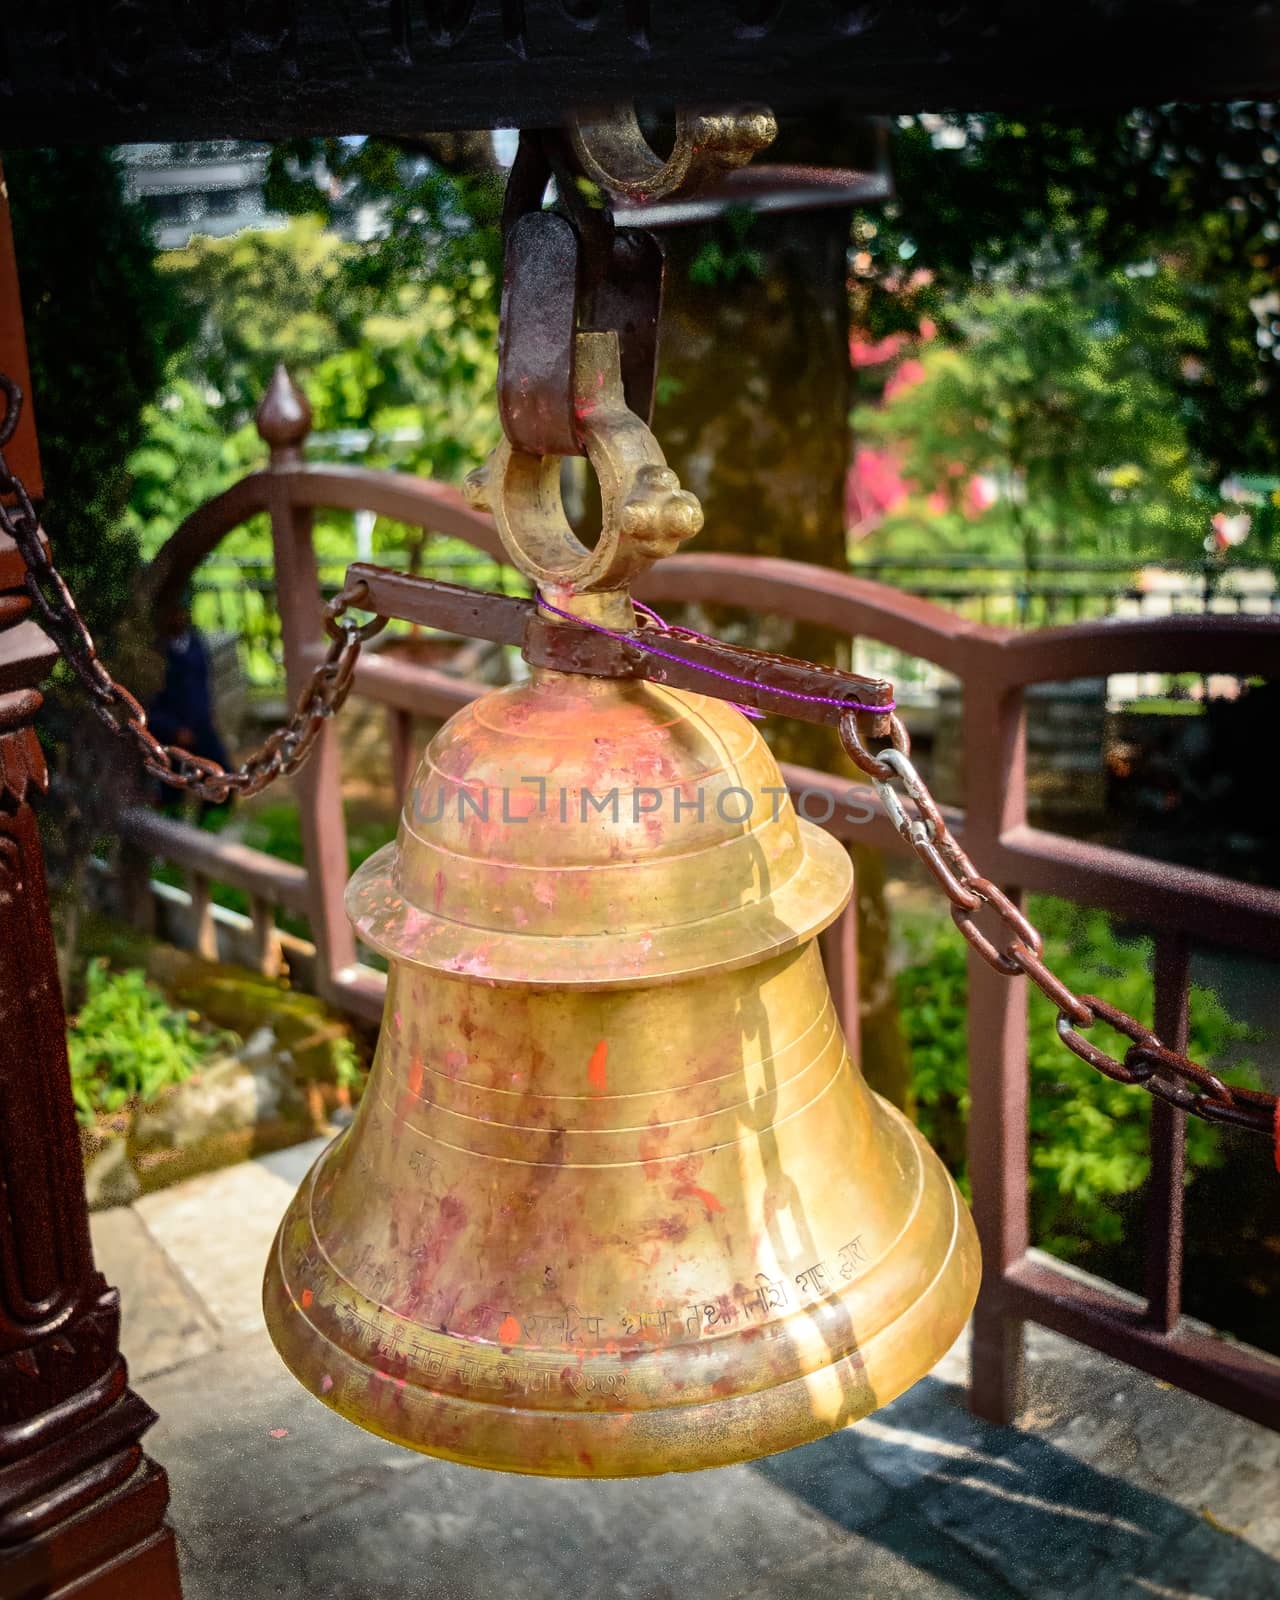 In Hinduism, bells are generally hung at the temple dome in front of the Garbhagriha. Generally, devotees ring the bell while entering into the sanctum. It is said that by ringing the bell, the devotee informs the deity of his/her arrival. The sound of the bell is considered auspicious which welcomes divinity and dispels evil.